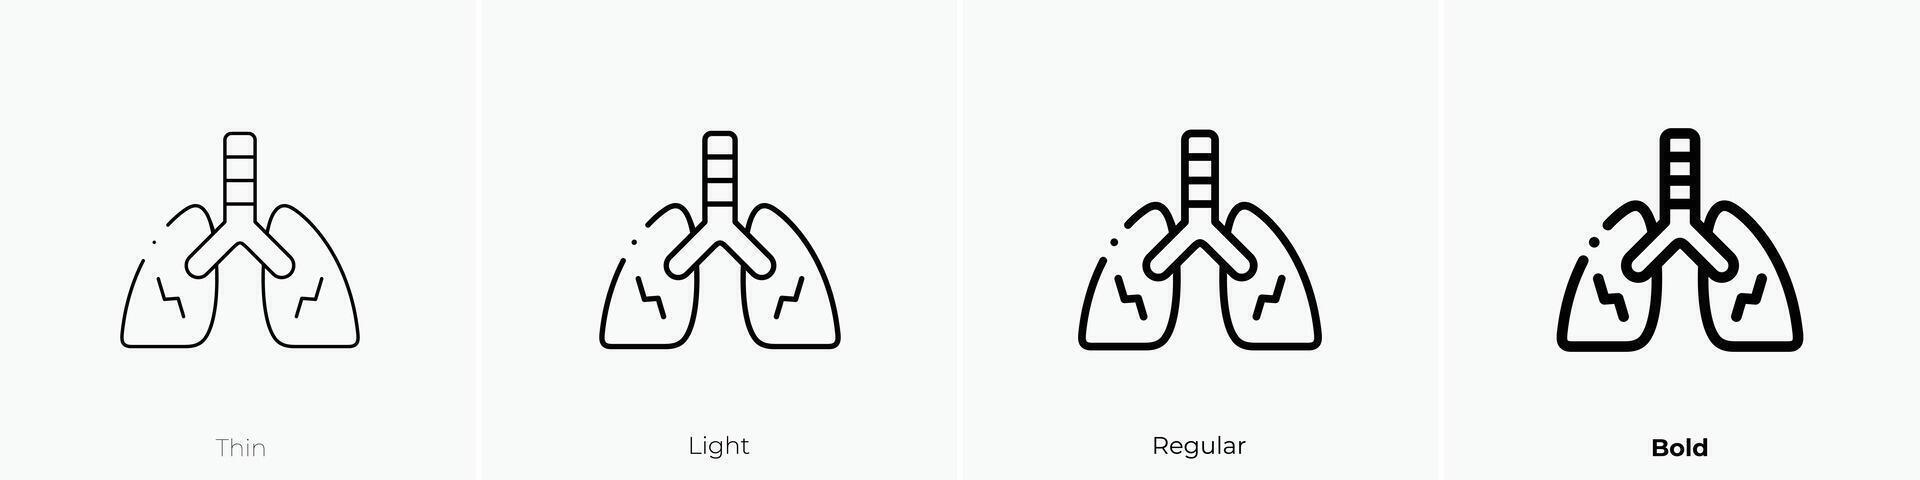 lungs icon. Thin, Light, Regular And Bold style design isolated on white background vector